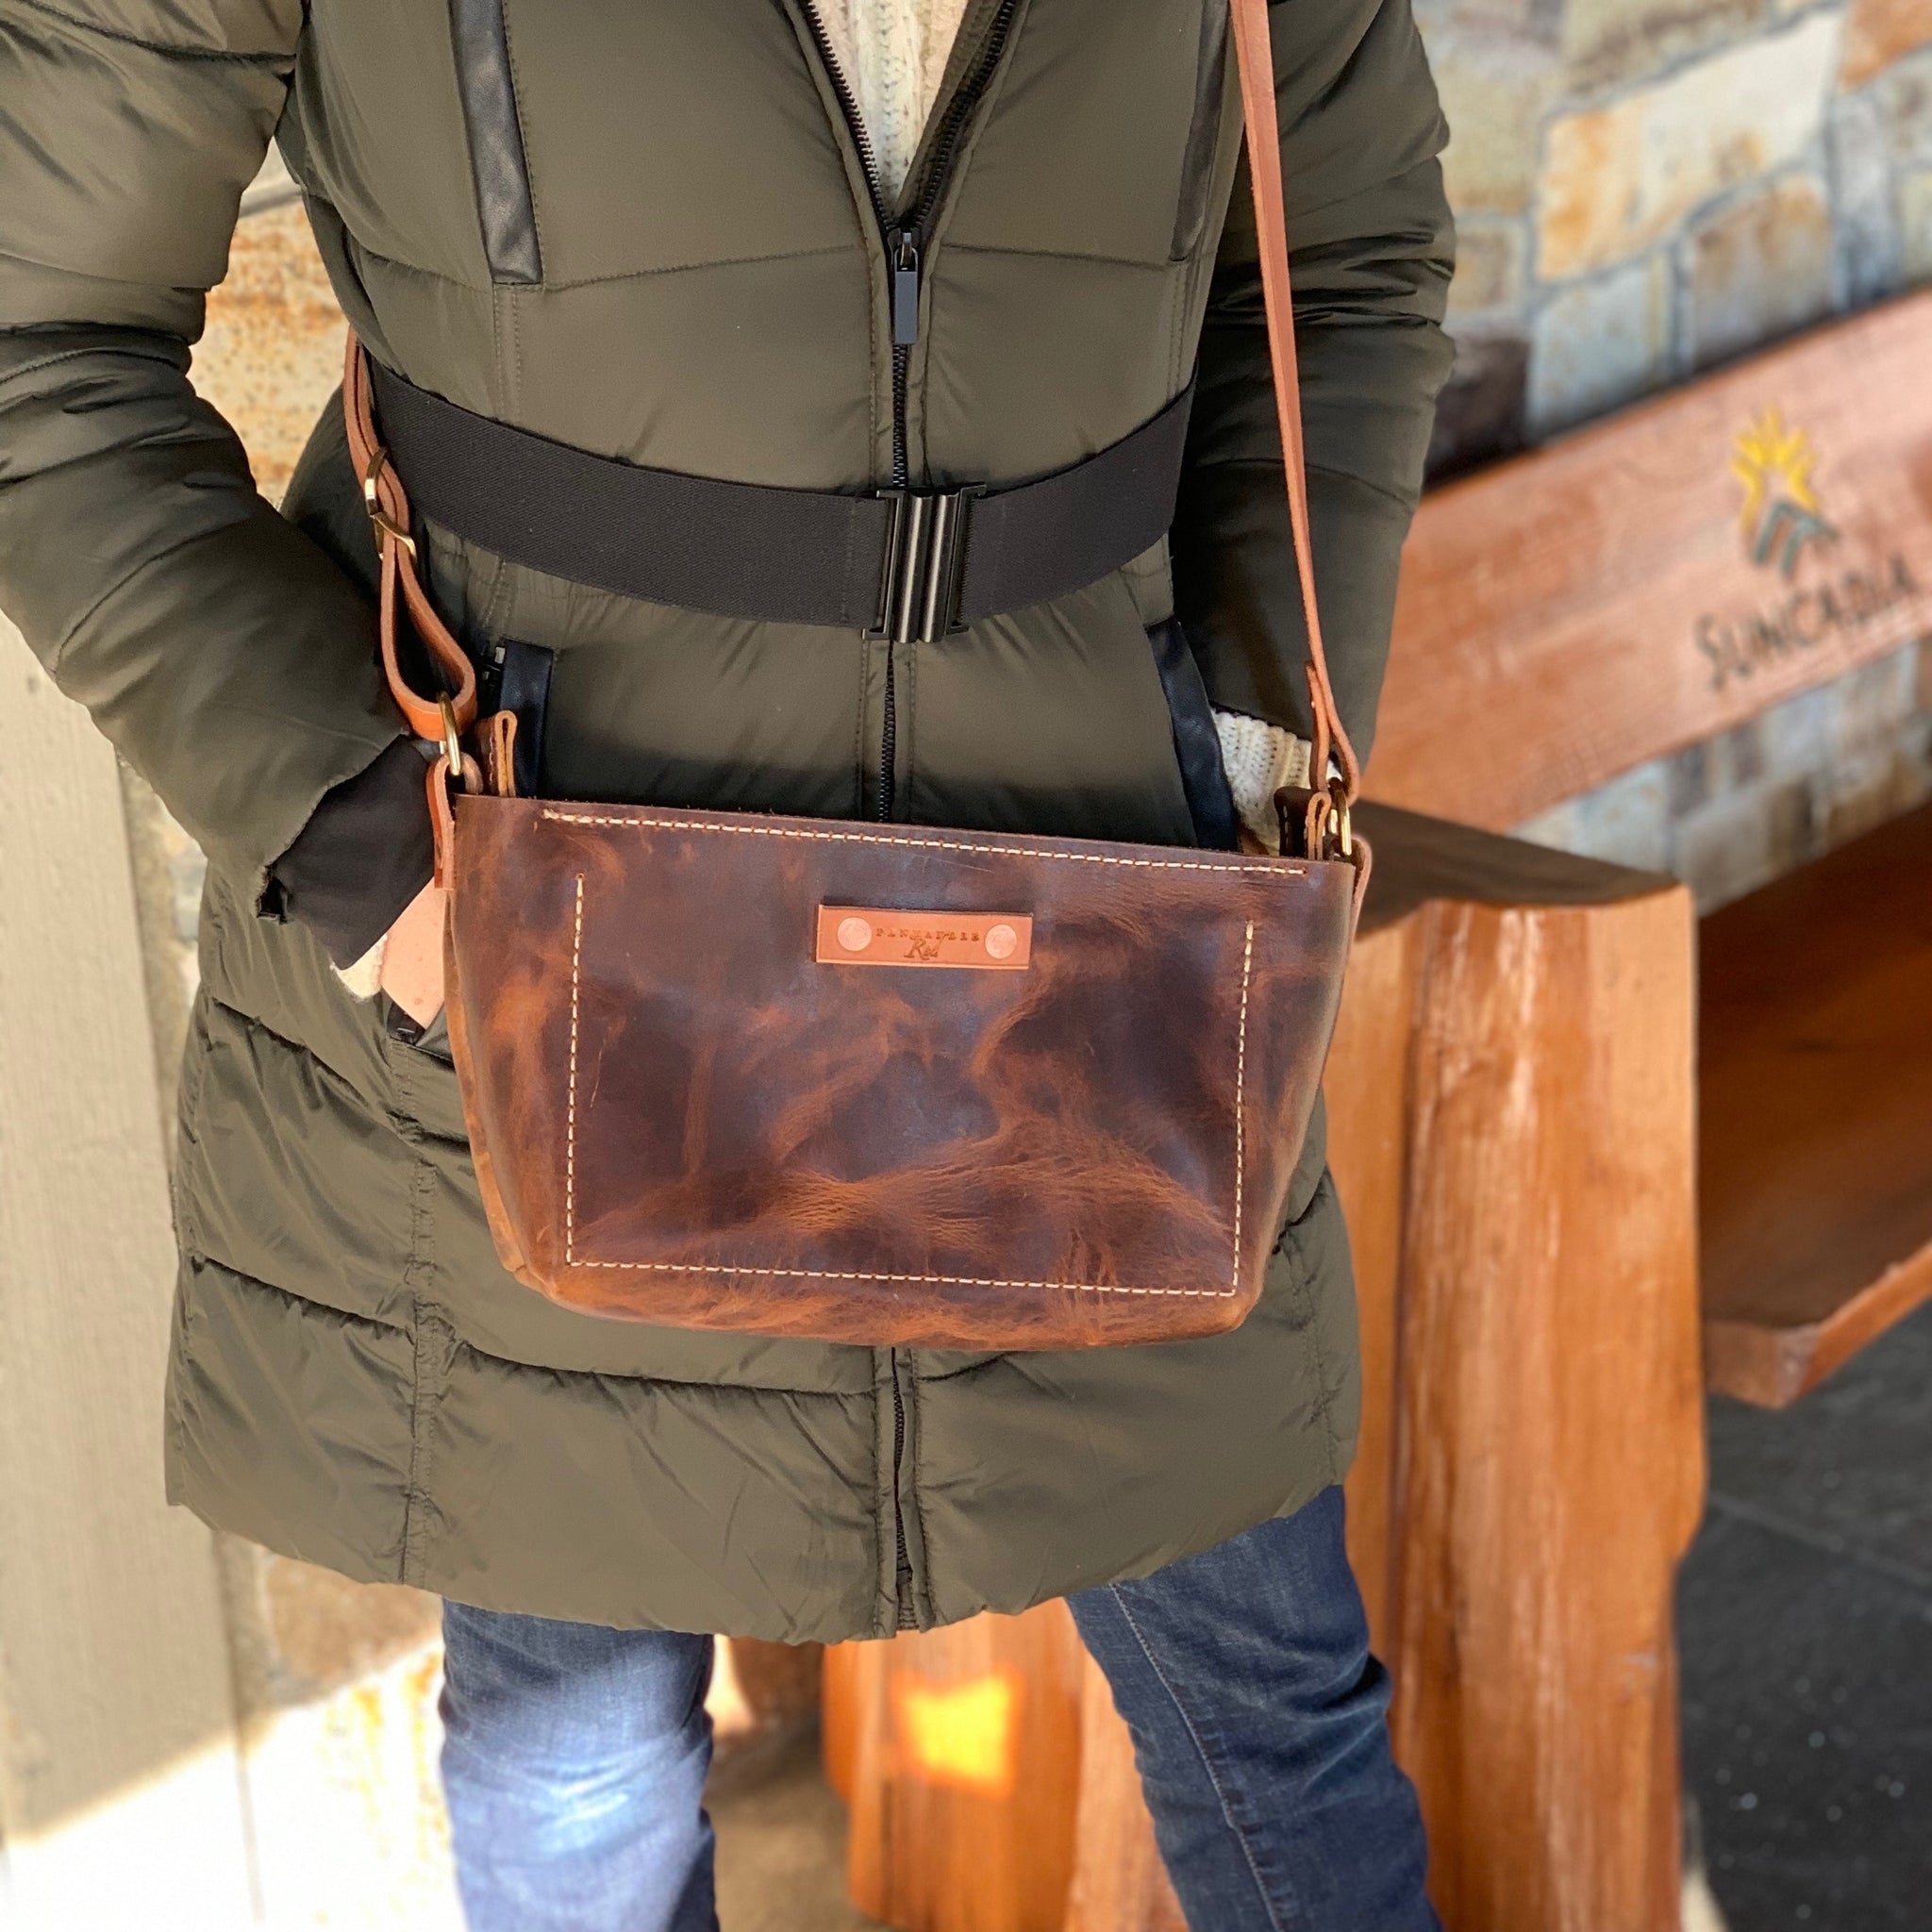 Brown Leather Crossbody Purse, Crossbody Purse, Brown Leather Bag, Leather Bag, Leather Purse, Crossbody, Leather Shop, Panhandle Red Company specializing in Leather Goods, Handbags, Totes, Purses, Everyday Carry Needs, and more. Full-grain leather items, custom gifts, all Handcrafted in Idaho, USA.